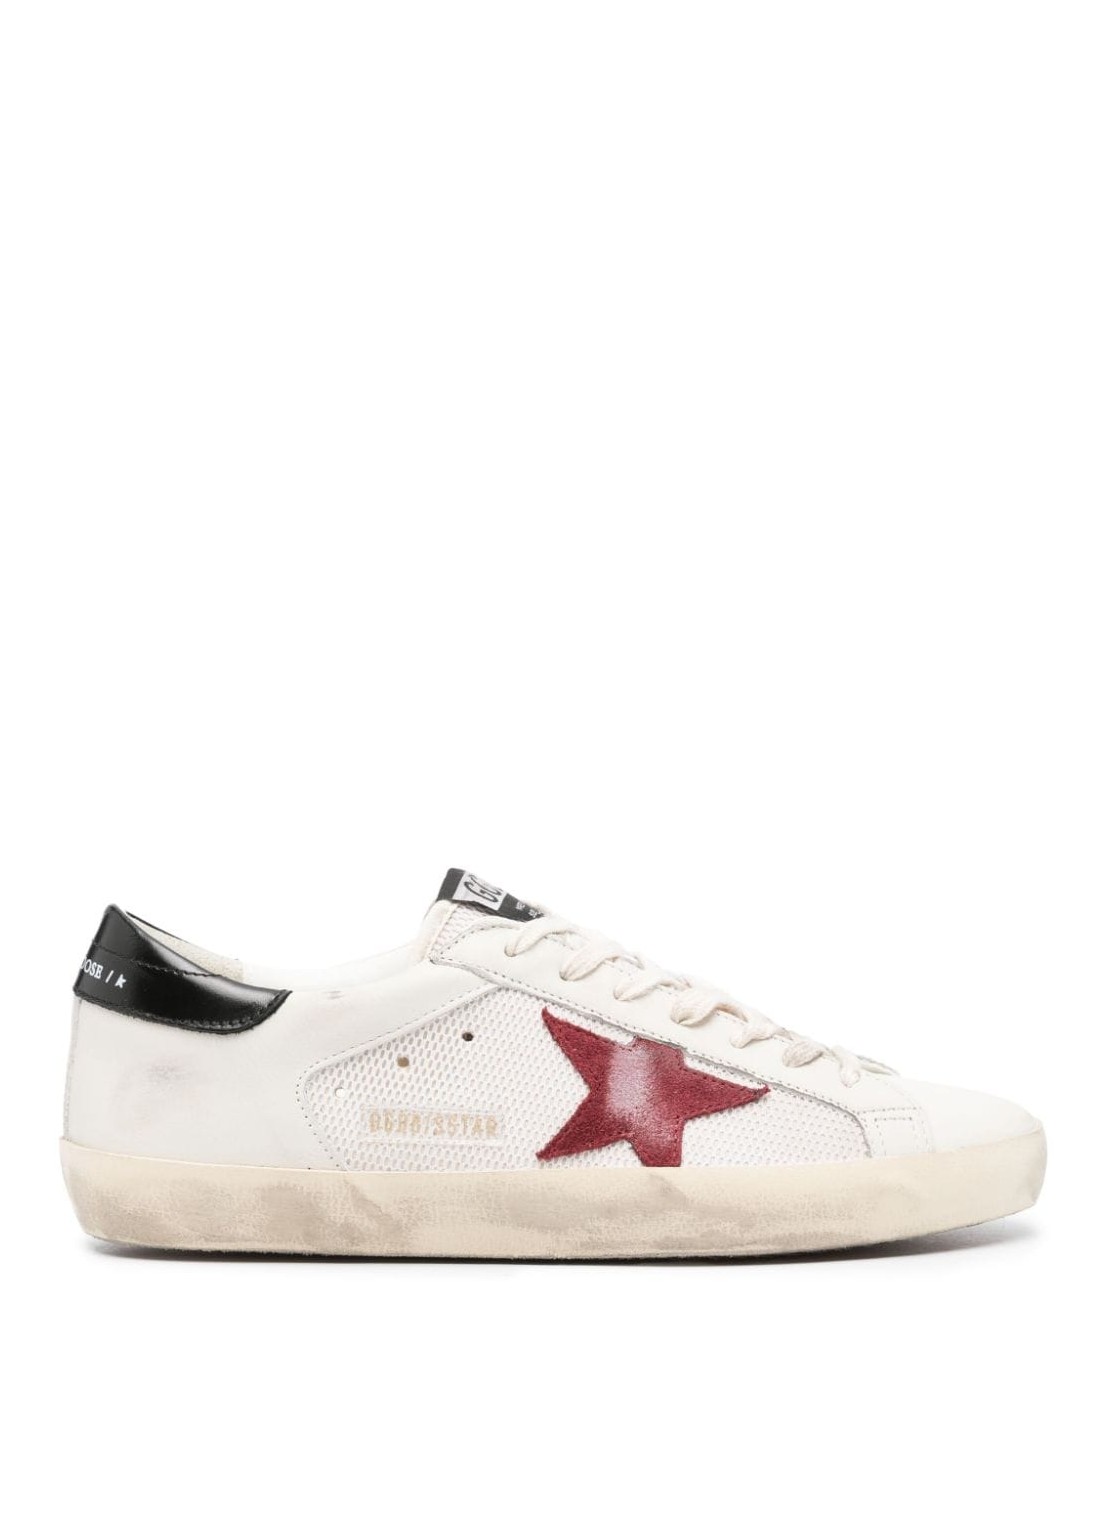 Sneaker golden goose sneaker man super-star net and leather upper suede star shiny leather h gmf0010